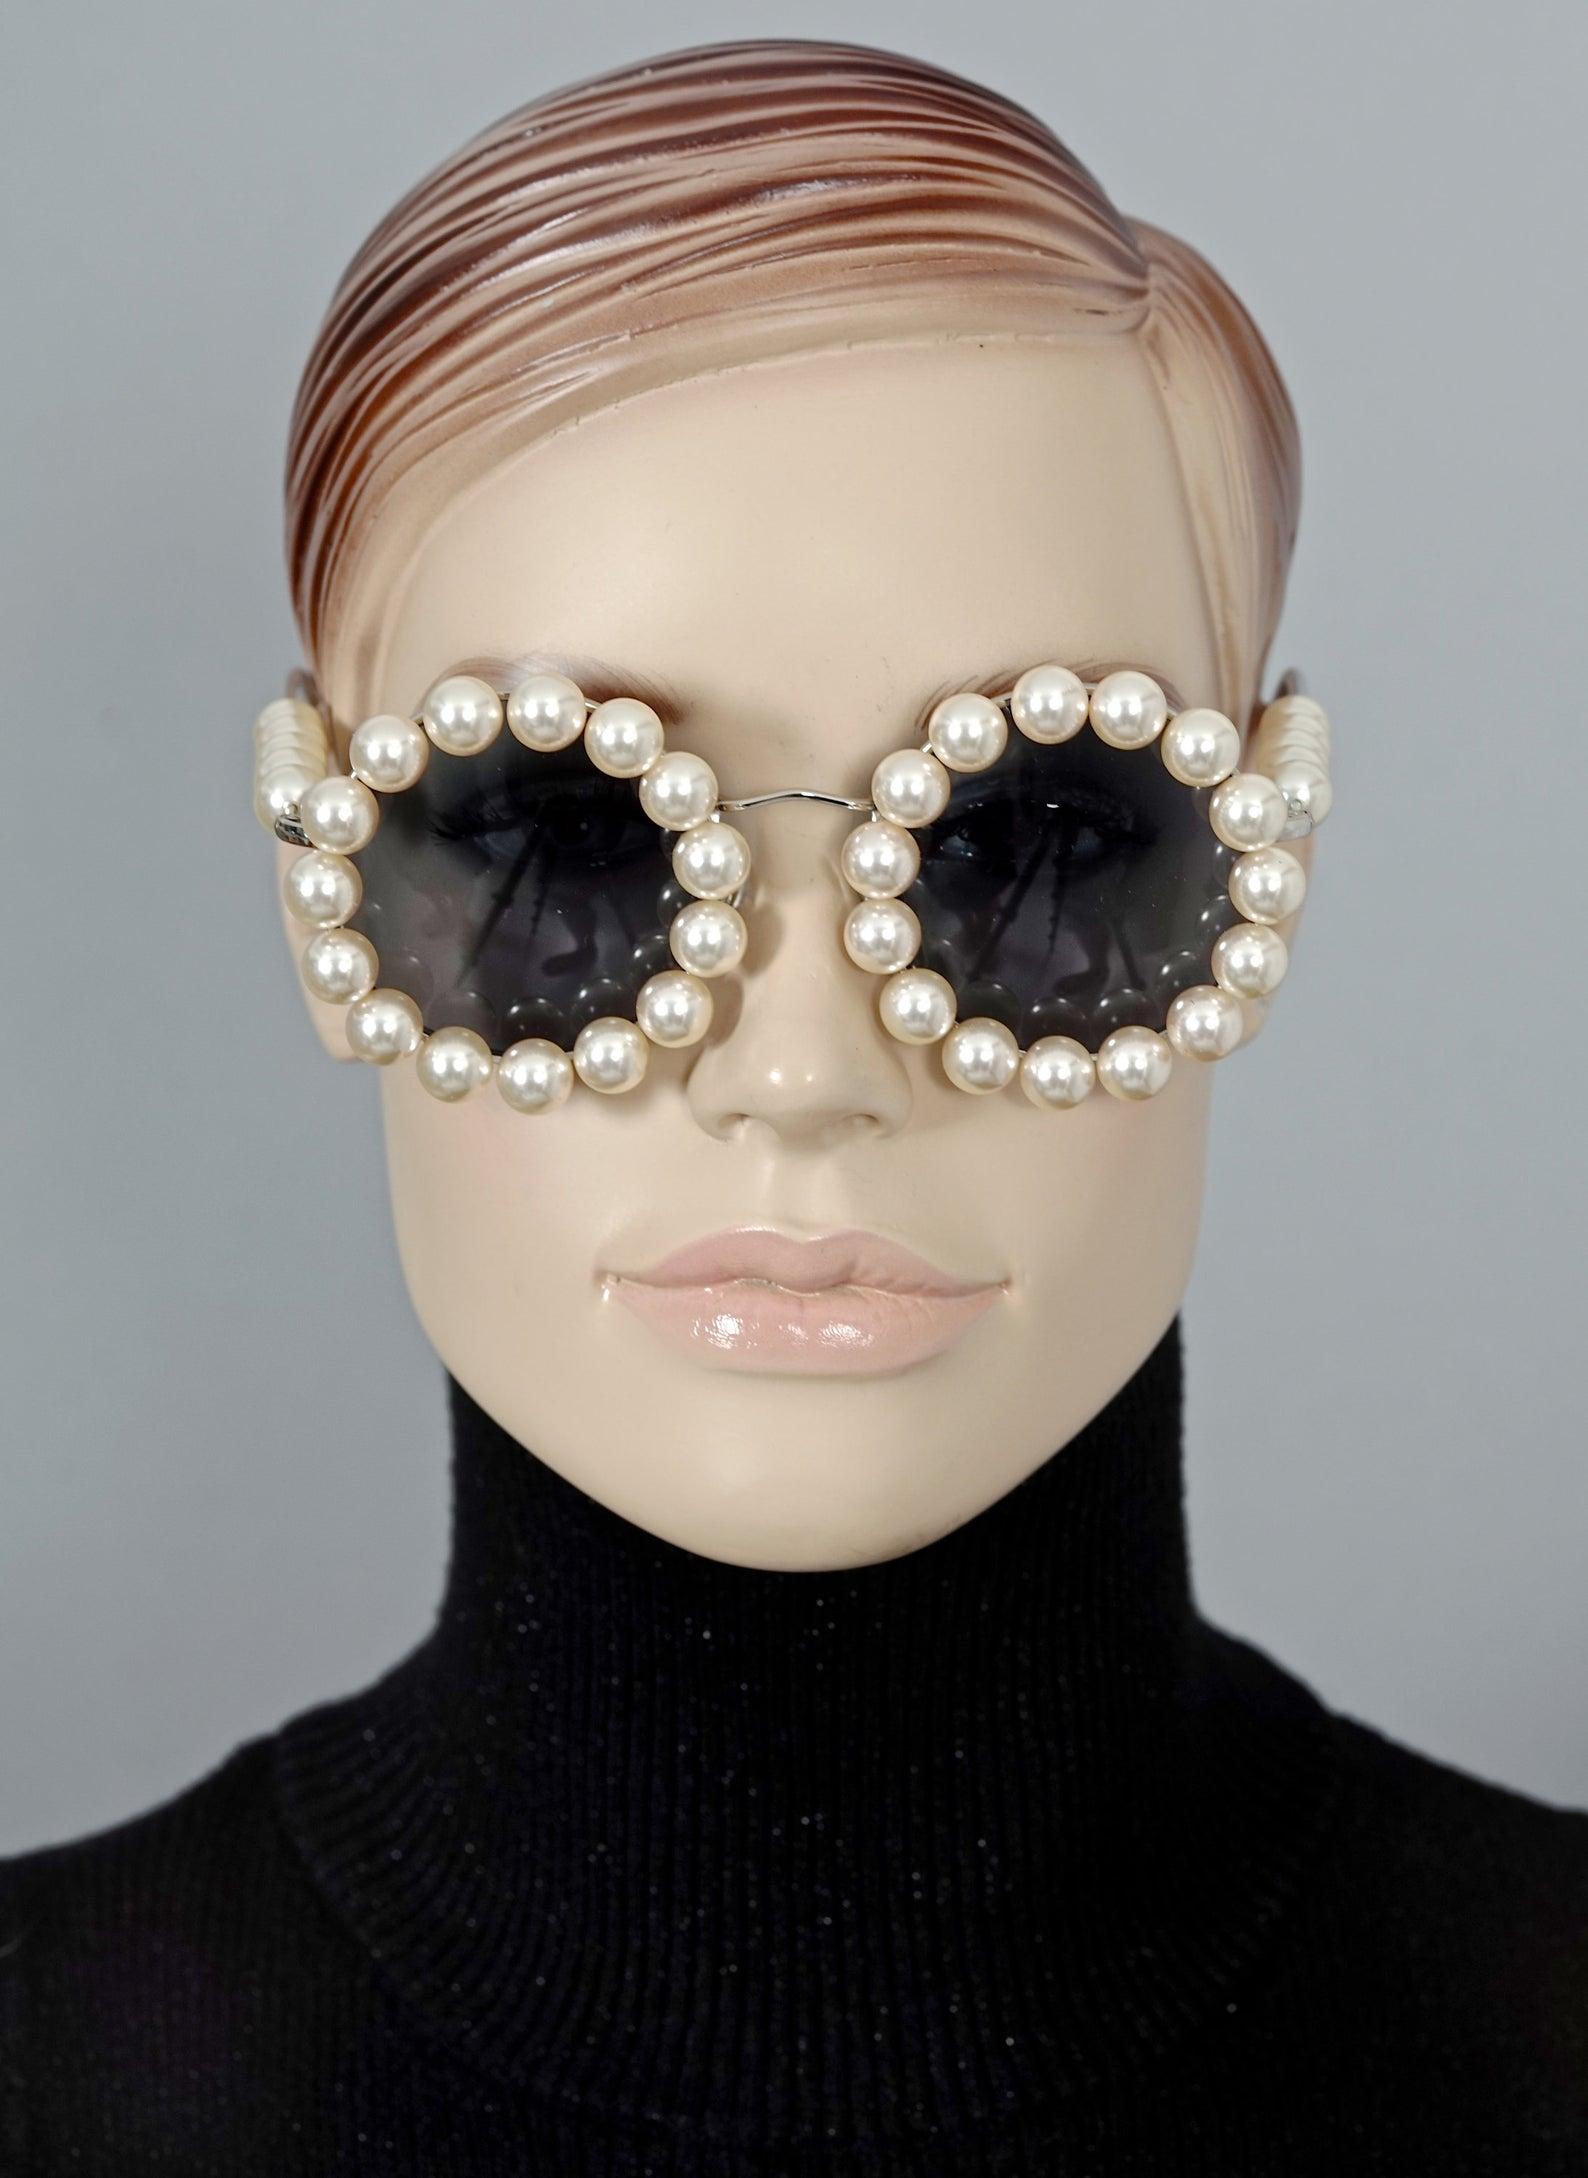 As seen on Rihanna.
From CHANEL Spring/ Summer 1994 collection.

Features:
- 100% Authentic CHANEL. 
- Pearl round sunglasses with metal frame.
- Silver hardware.
- Signed CHANEL Made in Italy 03526 Z0020 .
- Excellent vintage